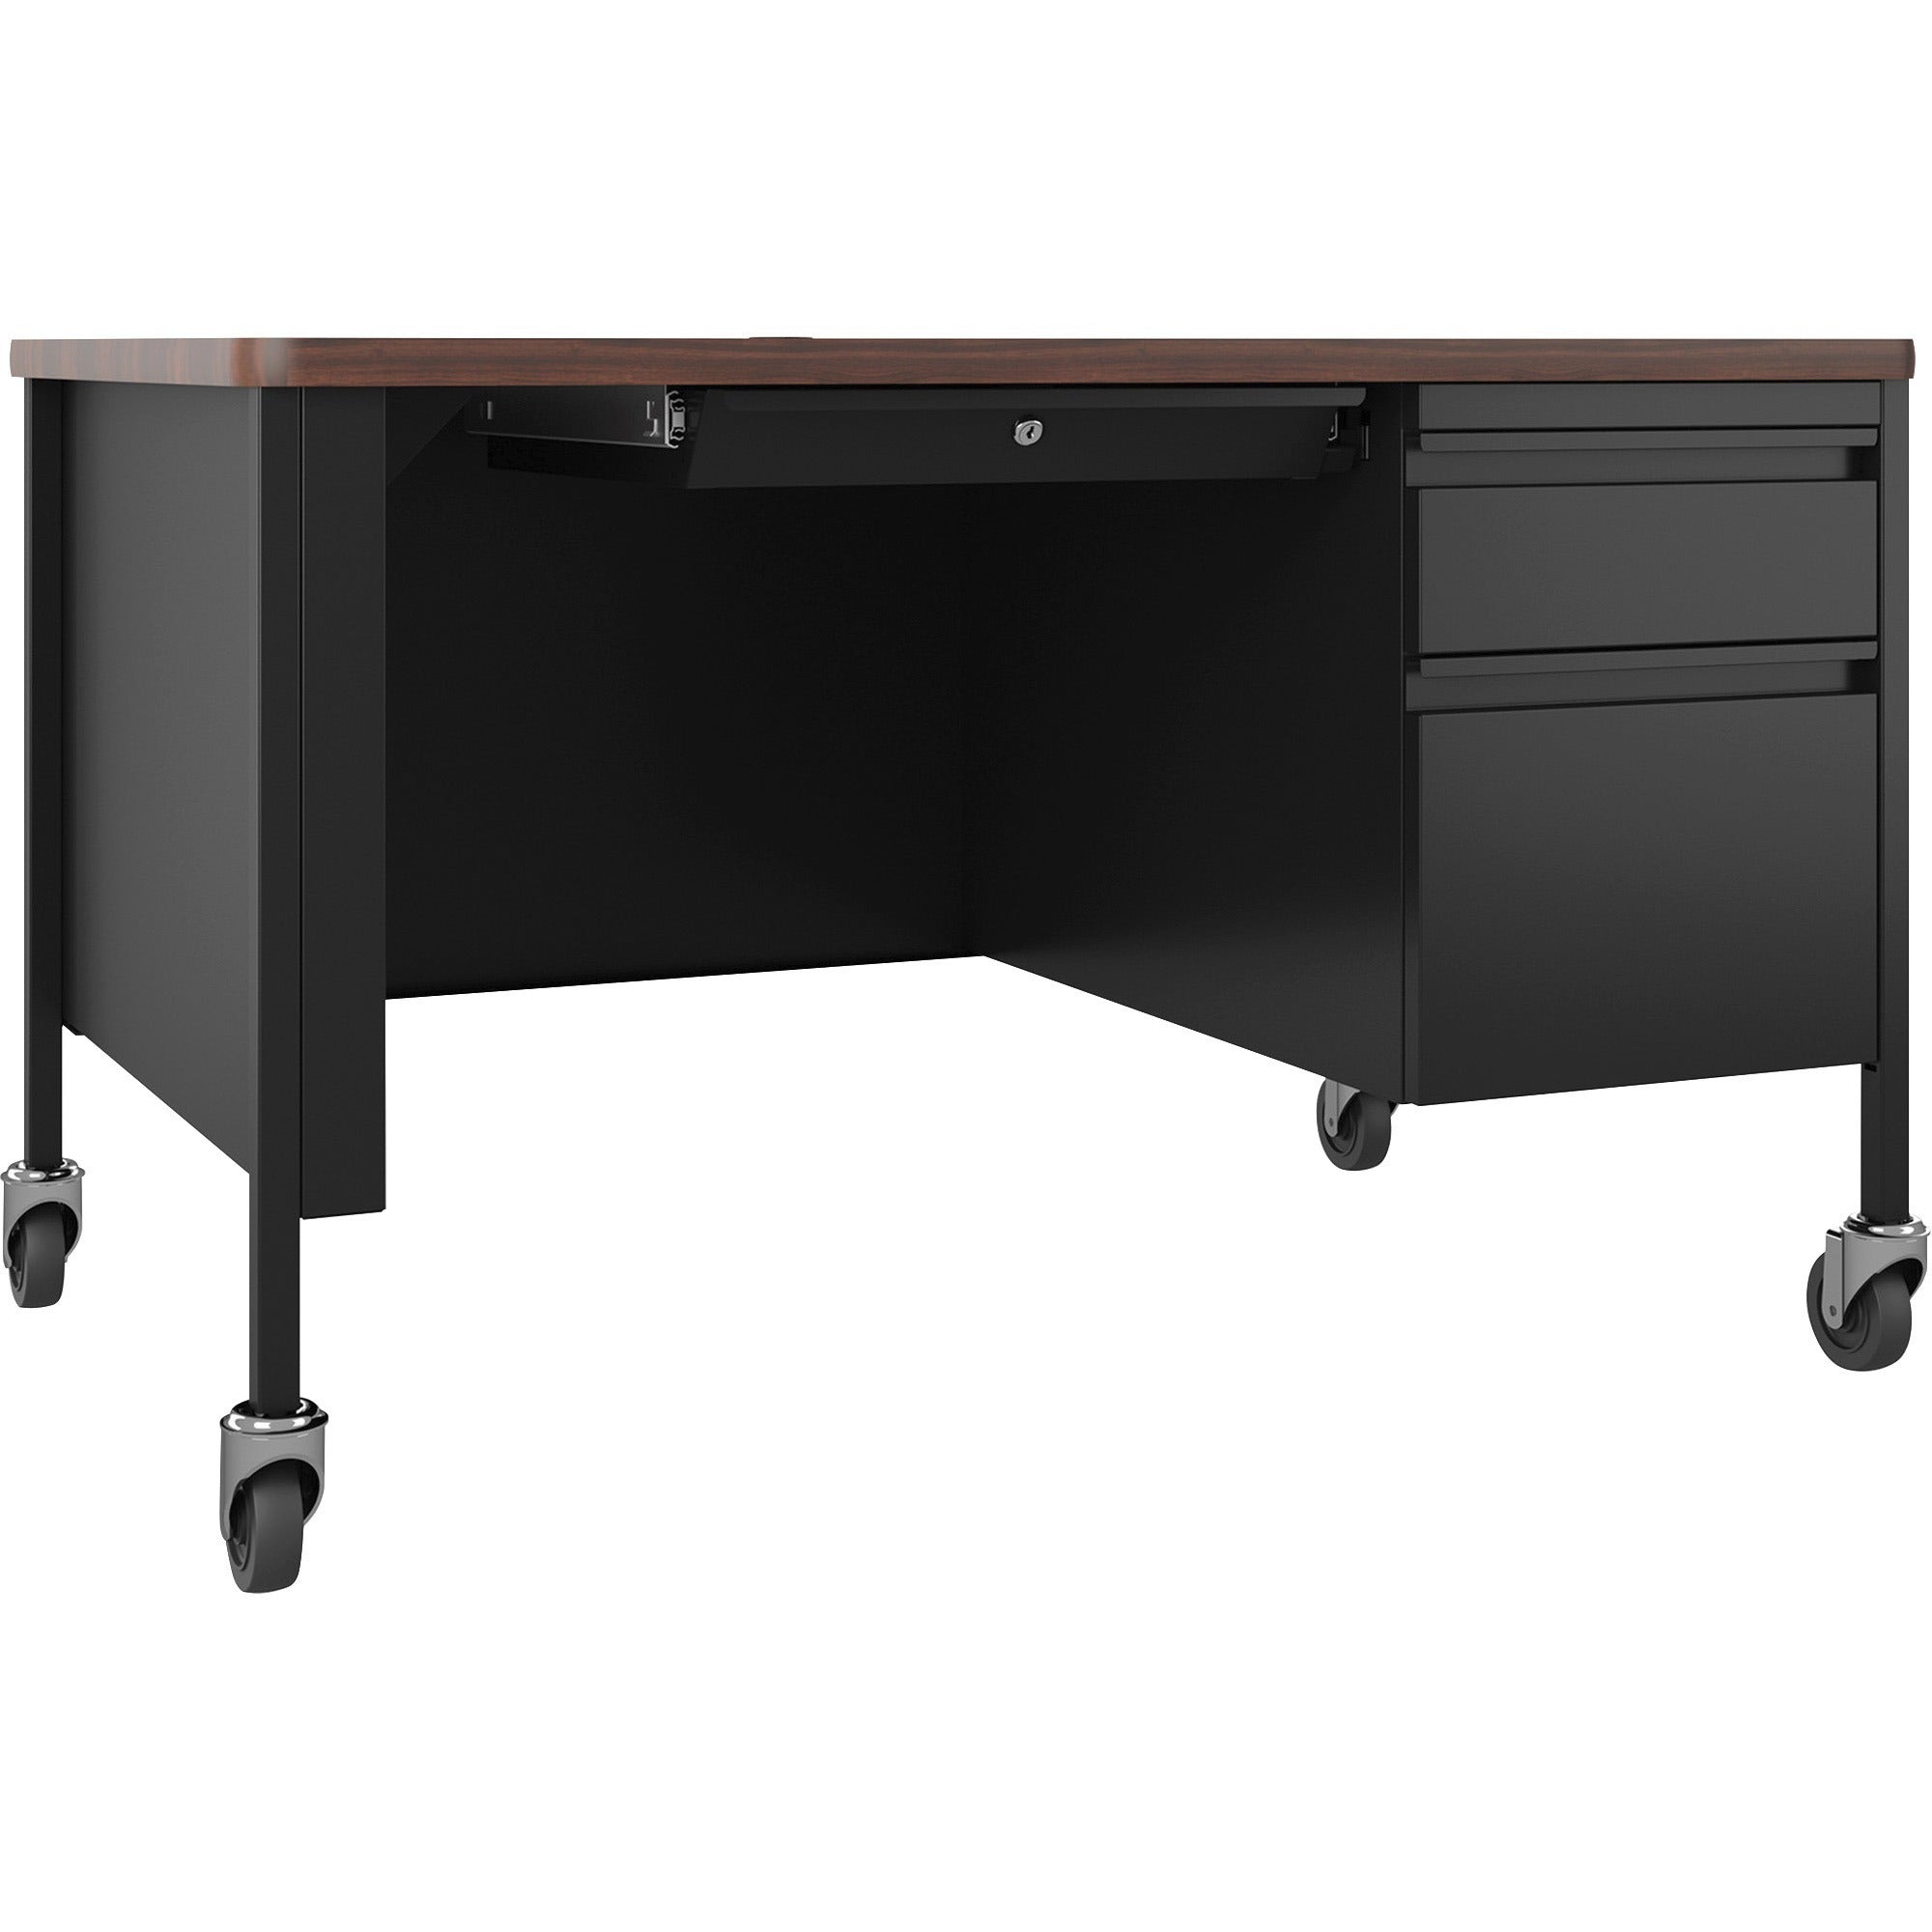 lorell-fortress-series-48-mobile-right-pedestal-teachers-desk-48-x-30295-box-file-drawers-single-pedestal-on-right-side-t-mold-edge_llr66943 - 1